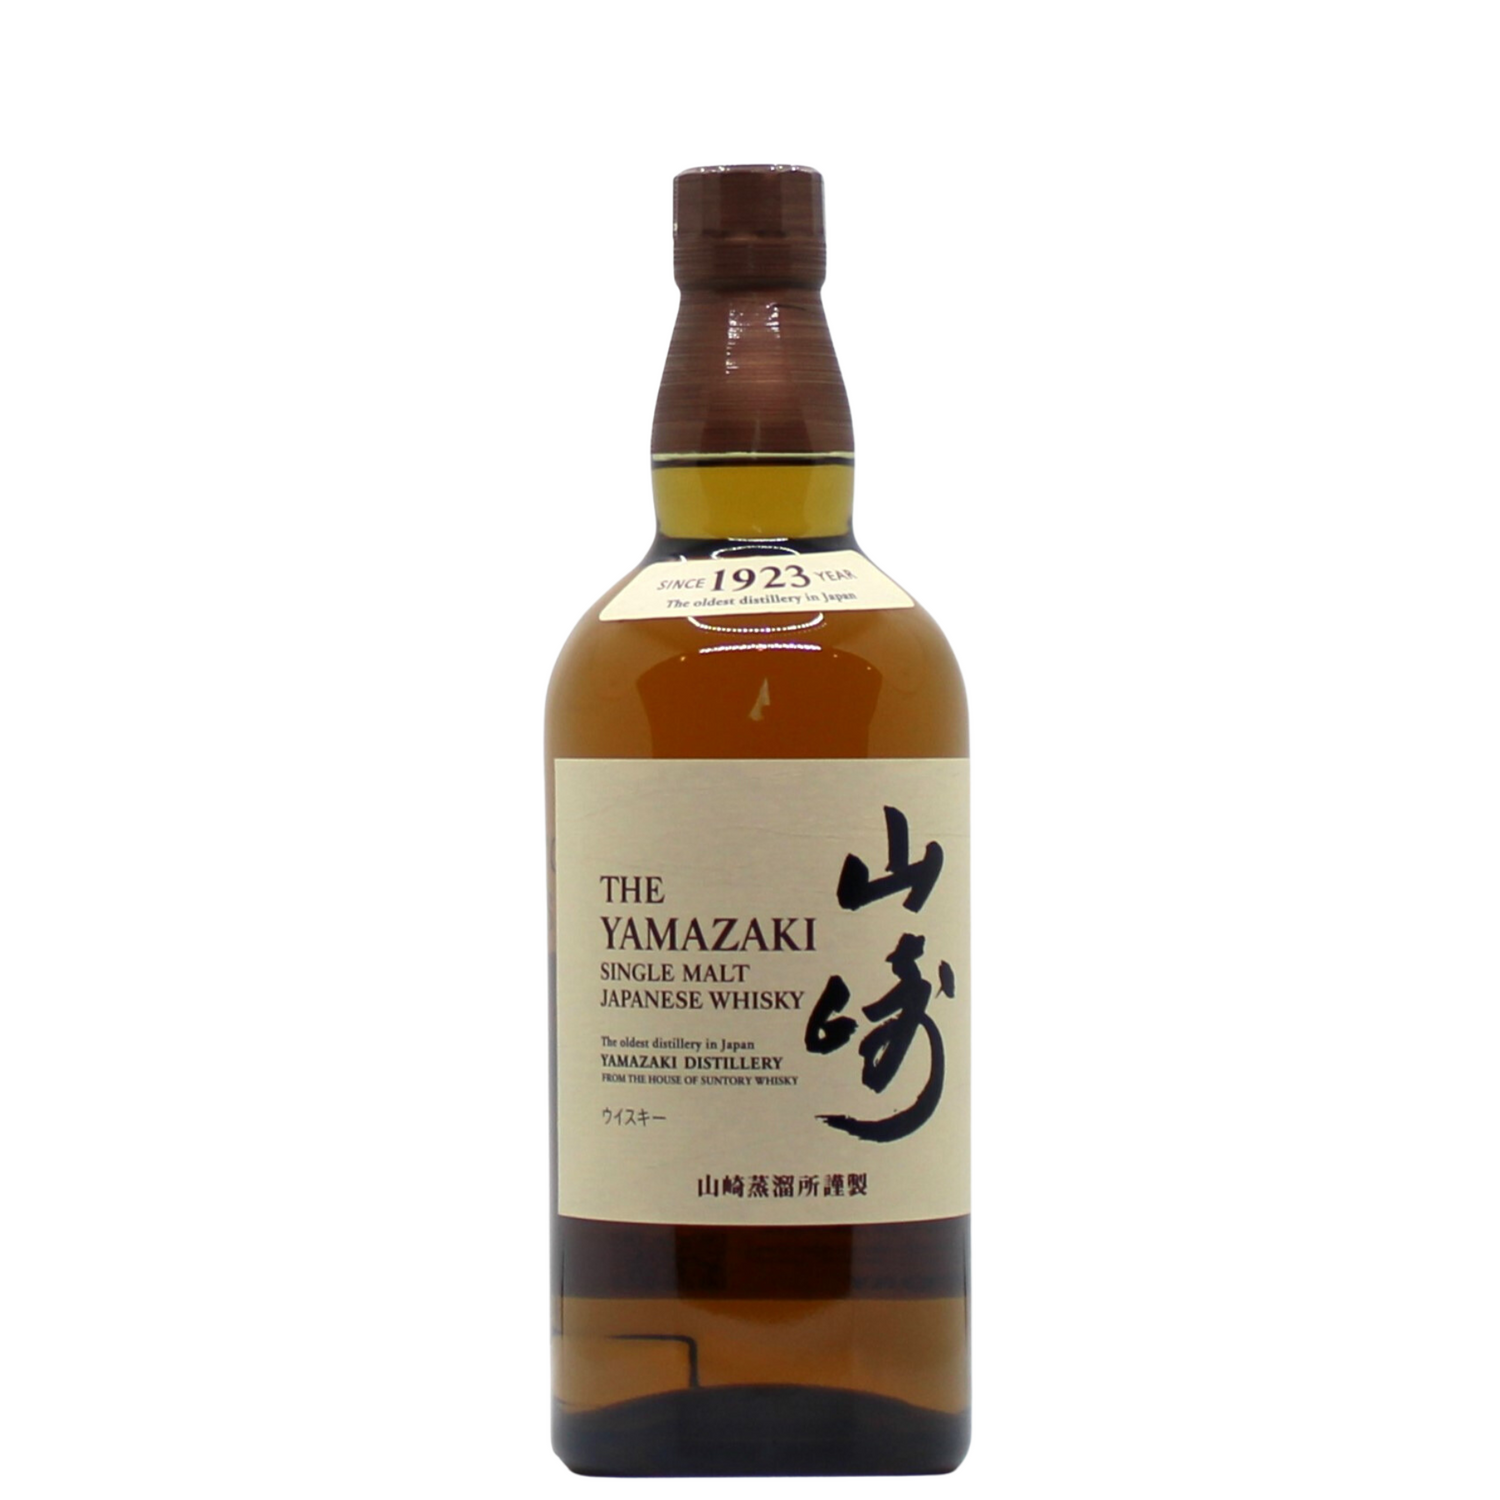 The core expression from the Yamazaki Distillery, this Distiller's Reserve showcases the balance between the various casks used in the vatting for this bottling including sherry casks and mizunara oak. A golden hue with fresh fruits on the nose, a palate of raspberry, white peach and coconut and finish of spices such as cinnamon. 